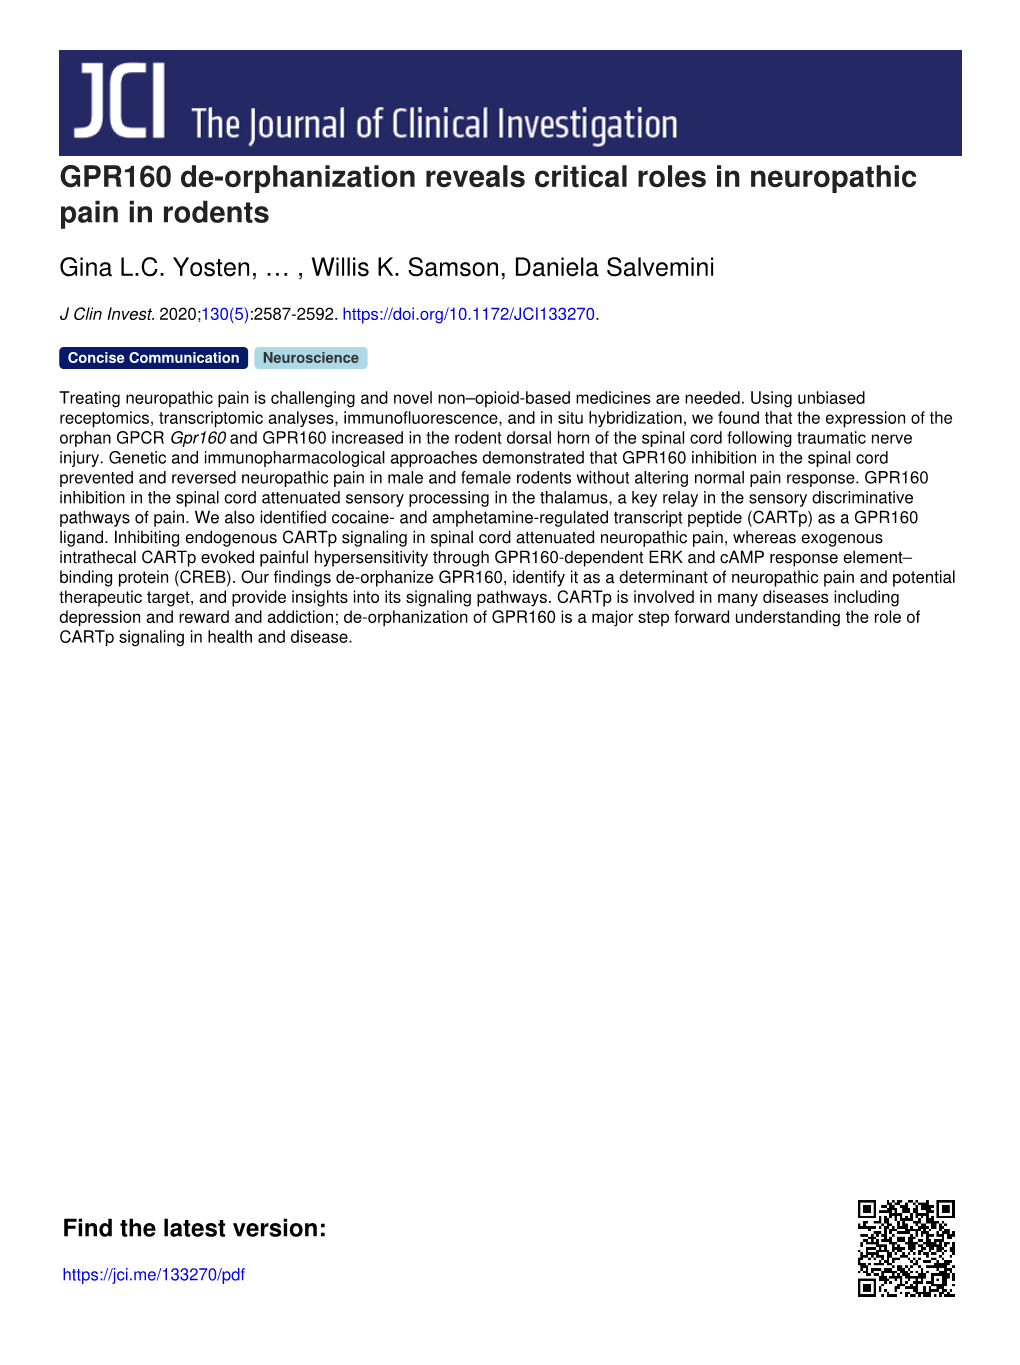 GPR160 De-Orphanization Reveals Critical Roles in Neuropathic Pain in Rodents